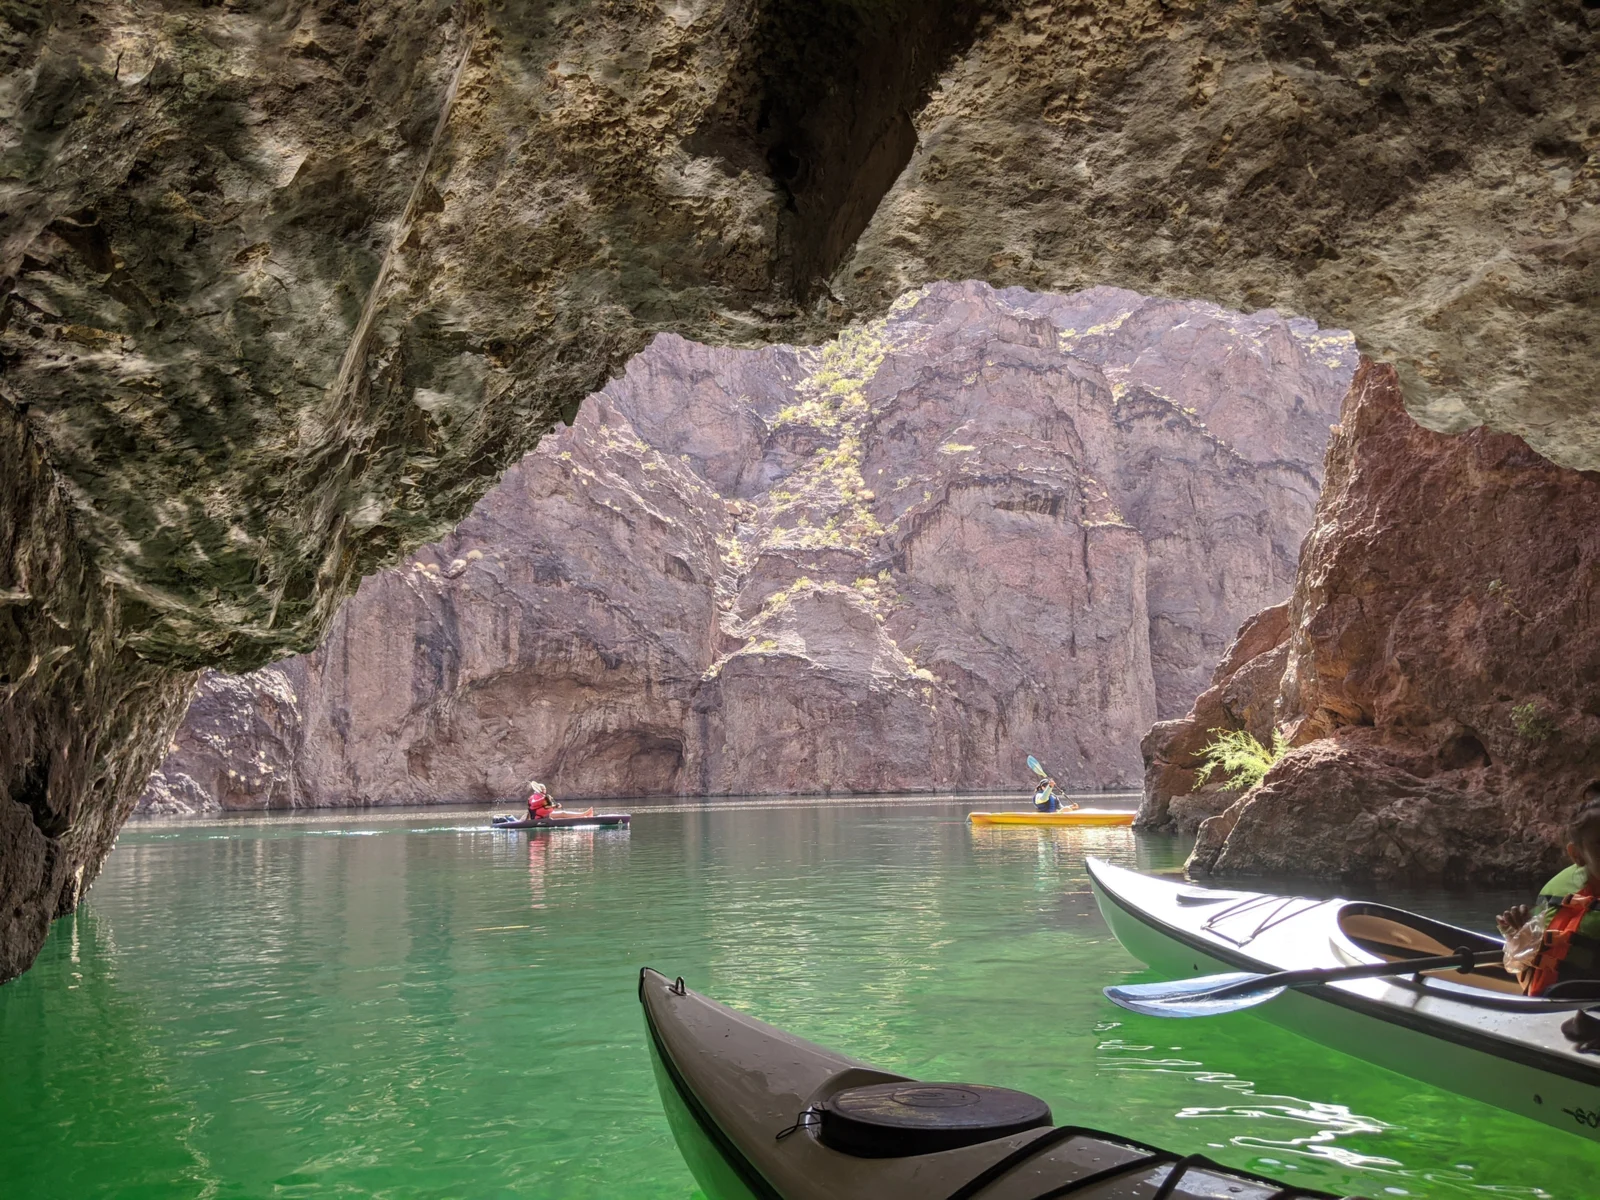 Emerald Cove, one of the best things to do in Las Vegas, as viewed from a kayak under a rock formation